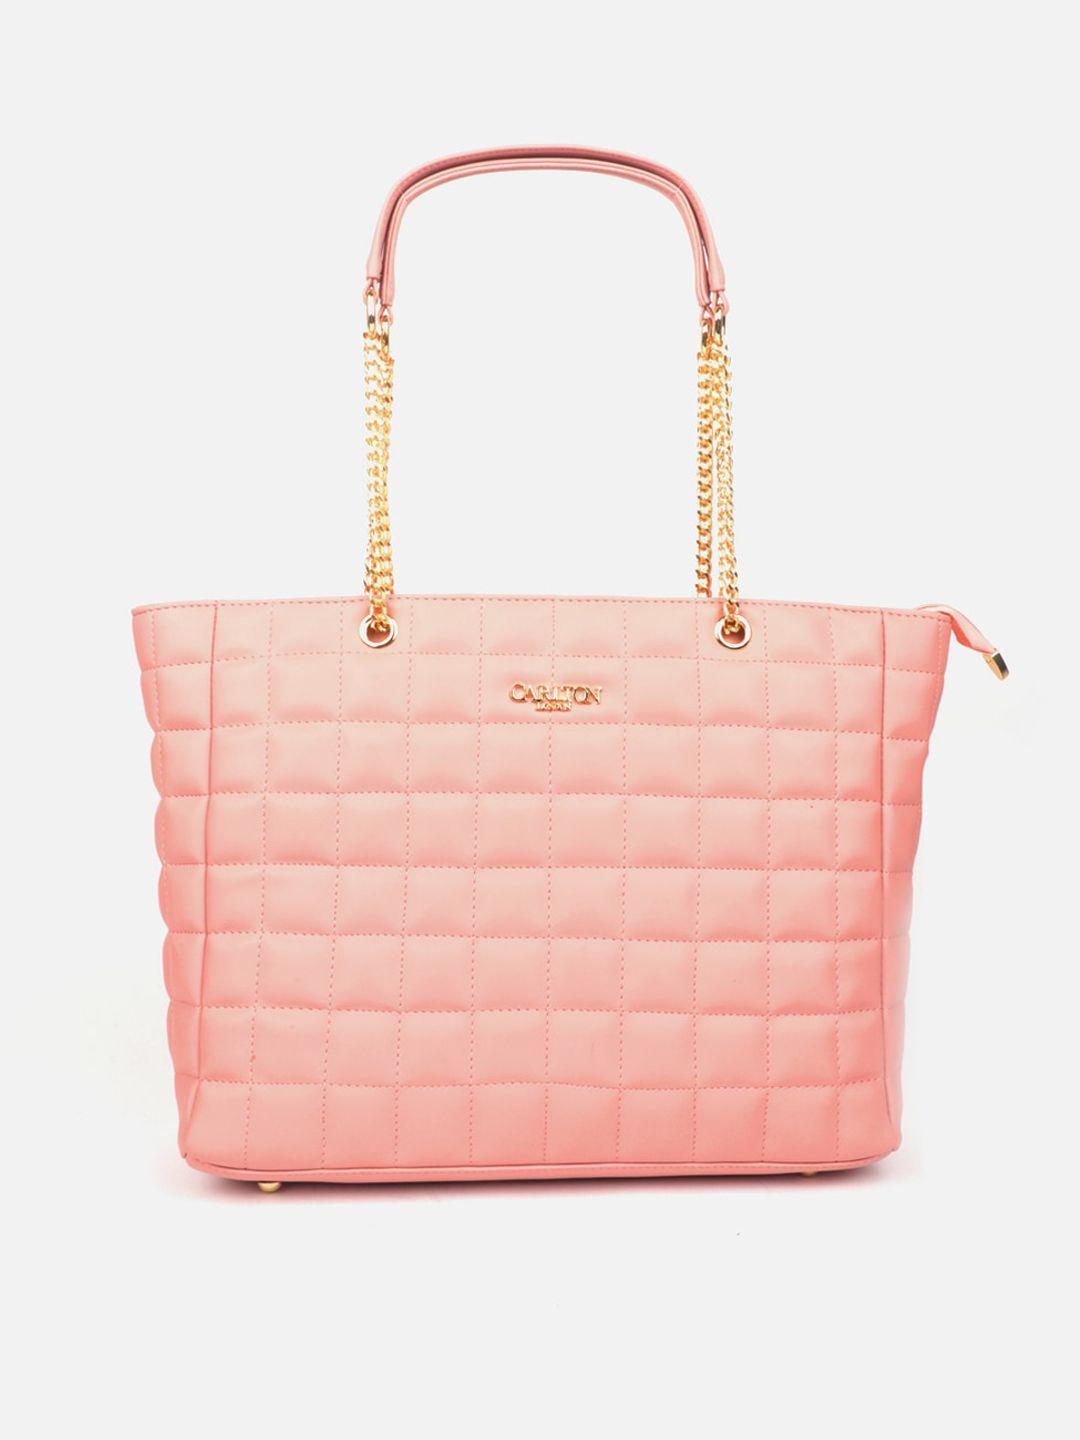 carlton-london-textured-quilted-structured-handheld-bag